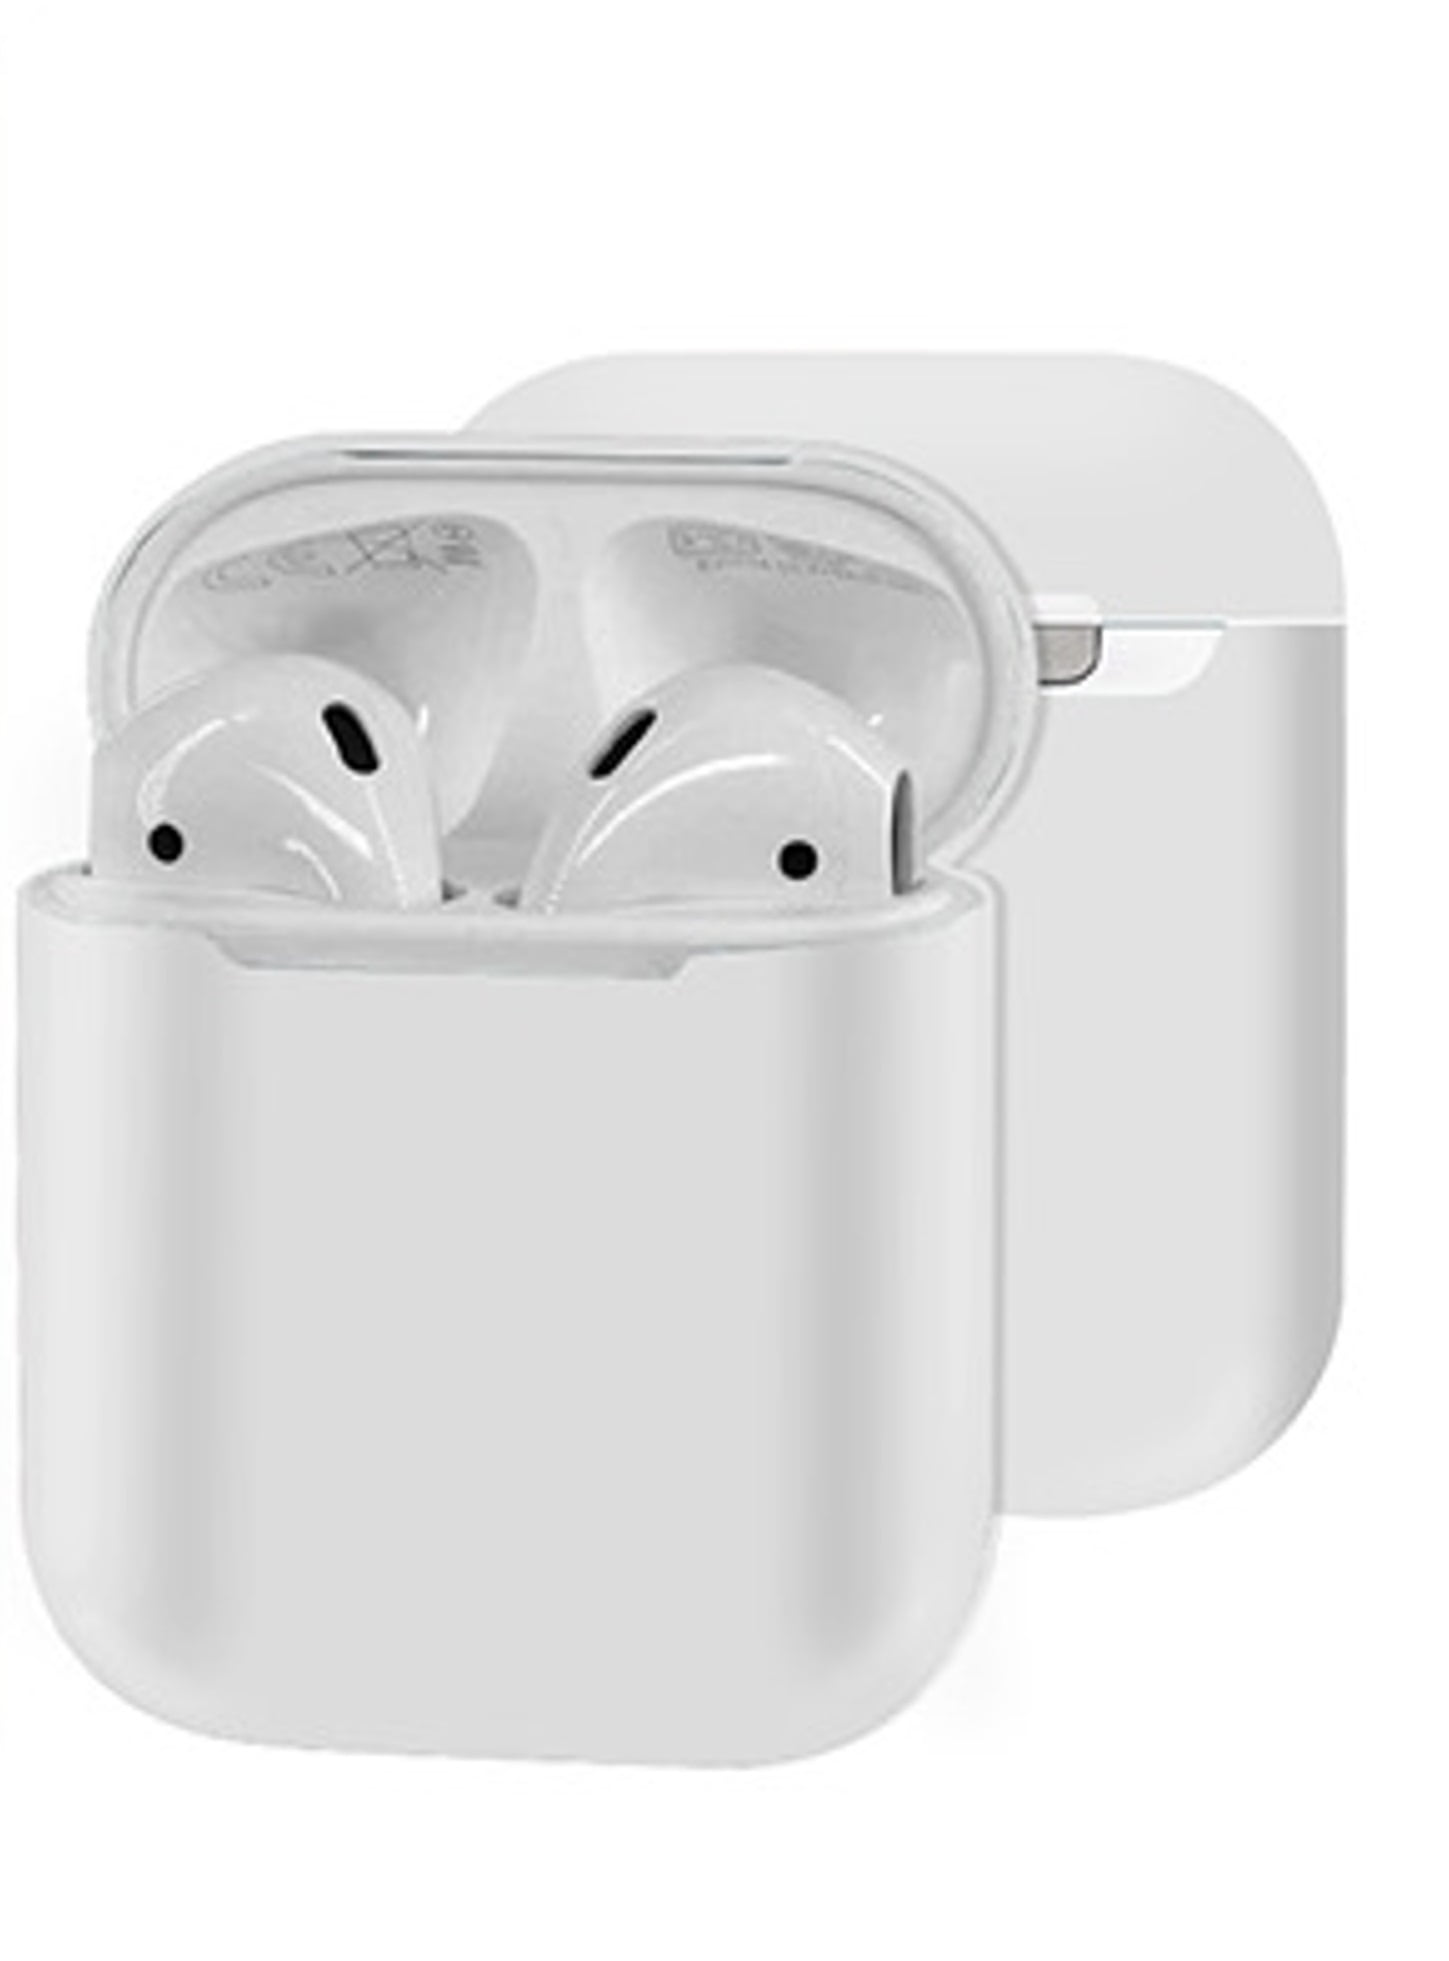 eb Weigeren Piket Apple AirPods Case, 0.8mm Ultra Thin Soft Cover Skin Silicone Rubber TPU  Gel Case Shockproof Cover with Charger Hole Desktop Charging Earphones  Earbuds Accessories for Apple AirPods 2 & 1 - WHITE - Walmart.com